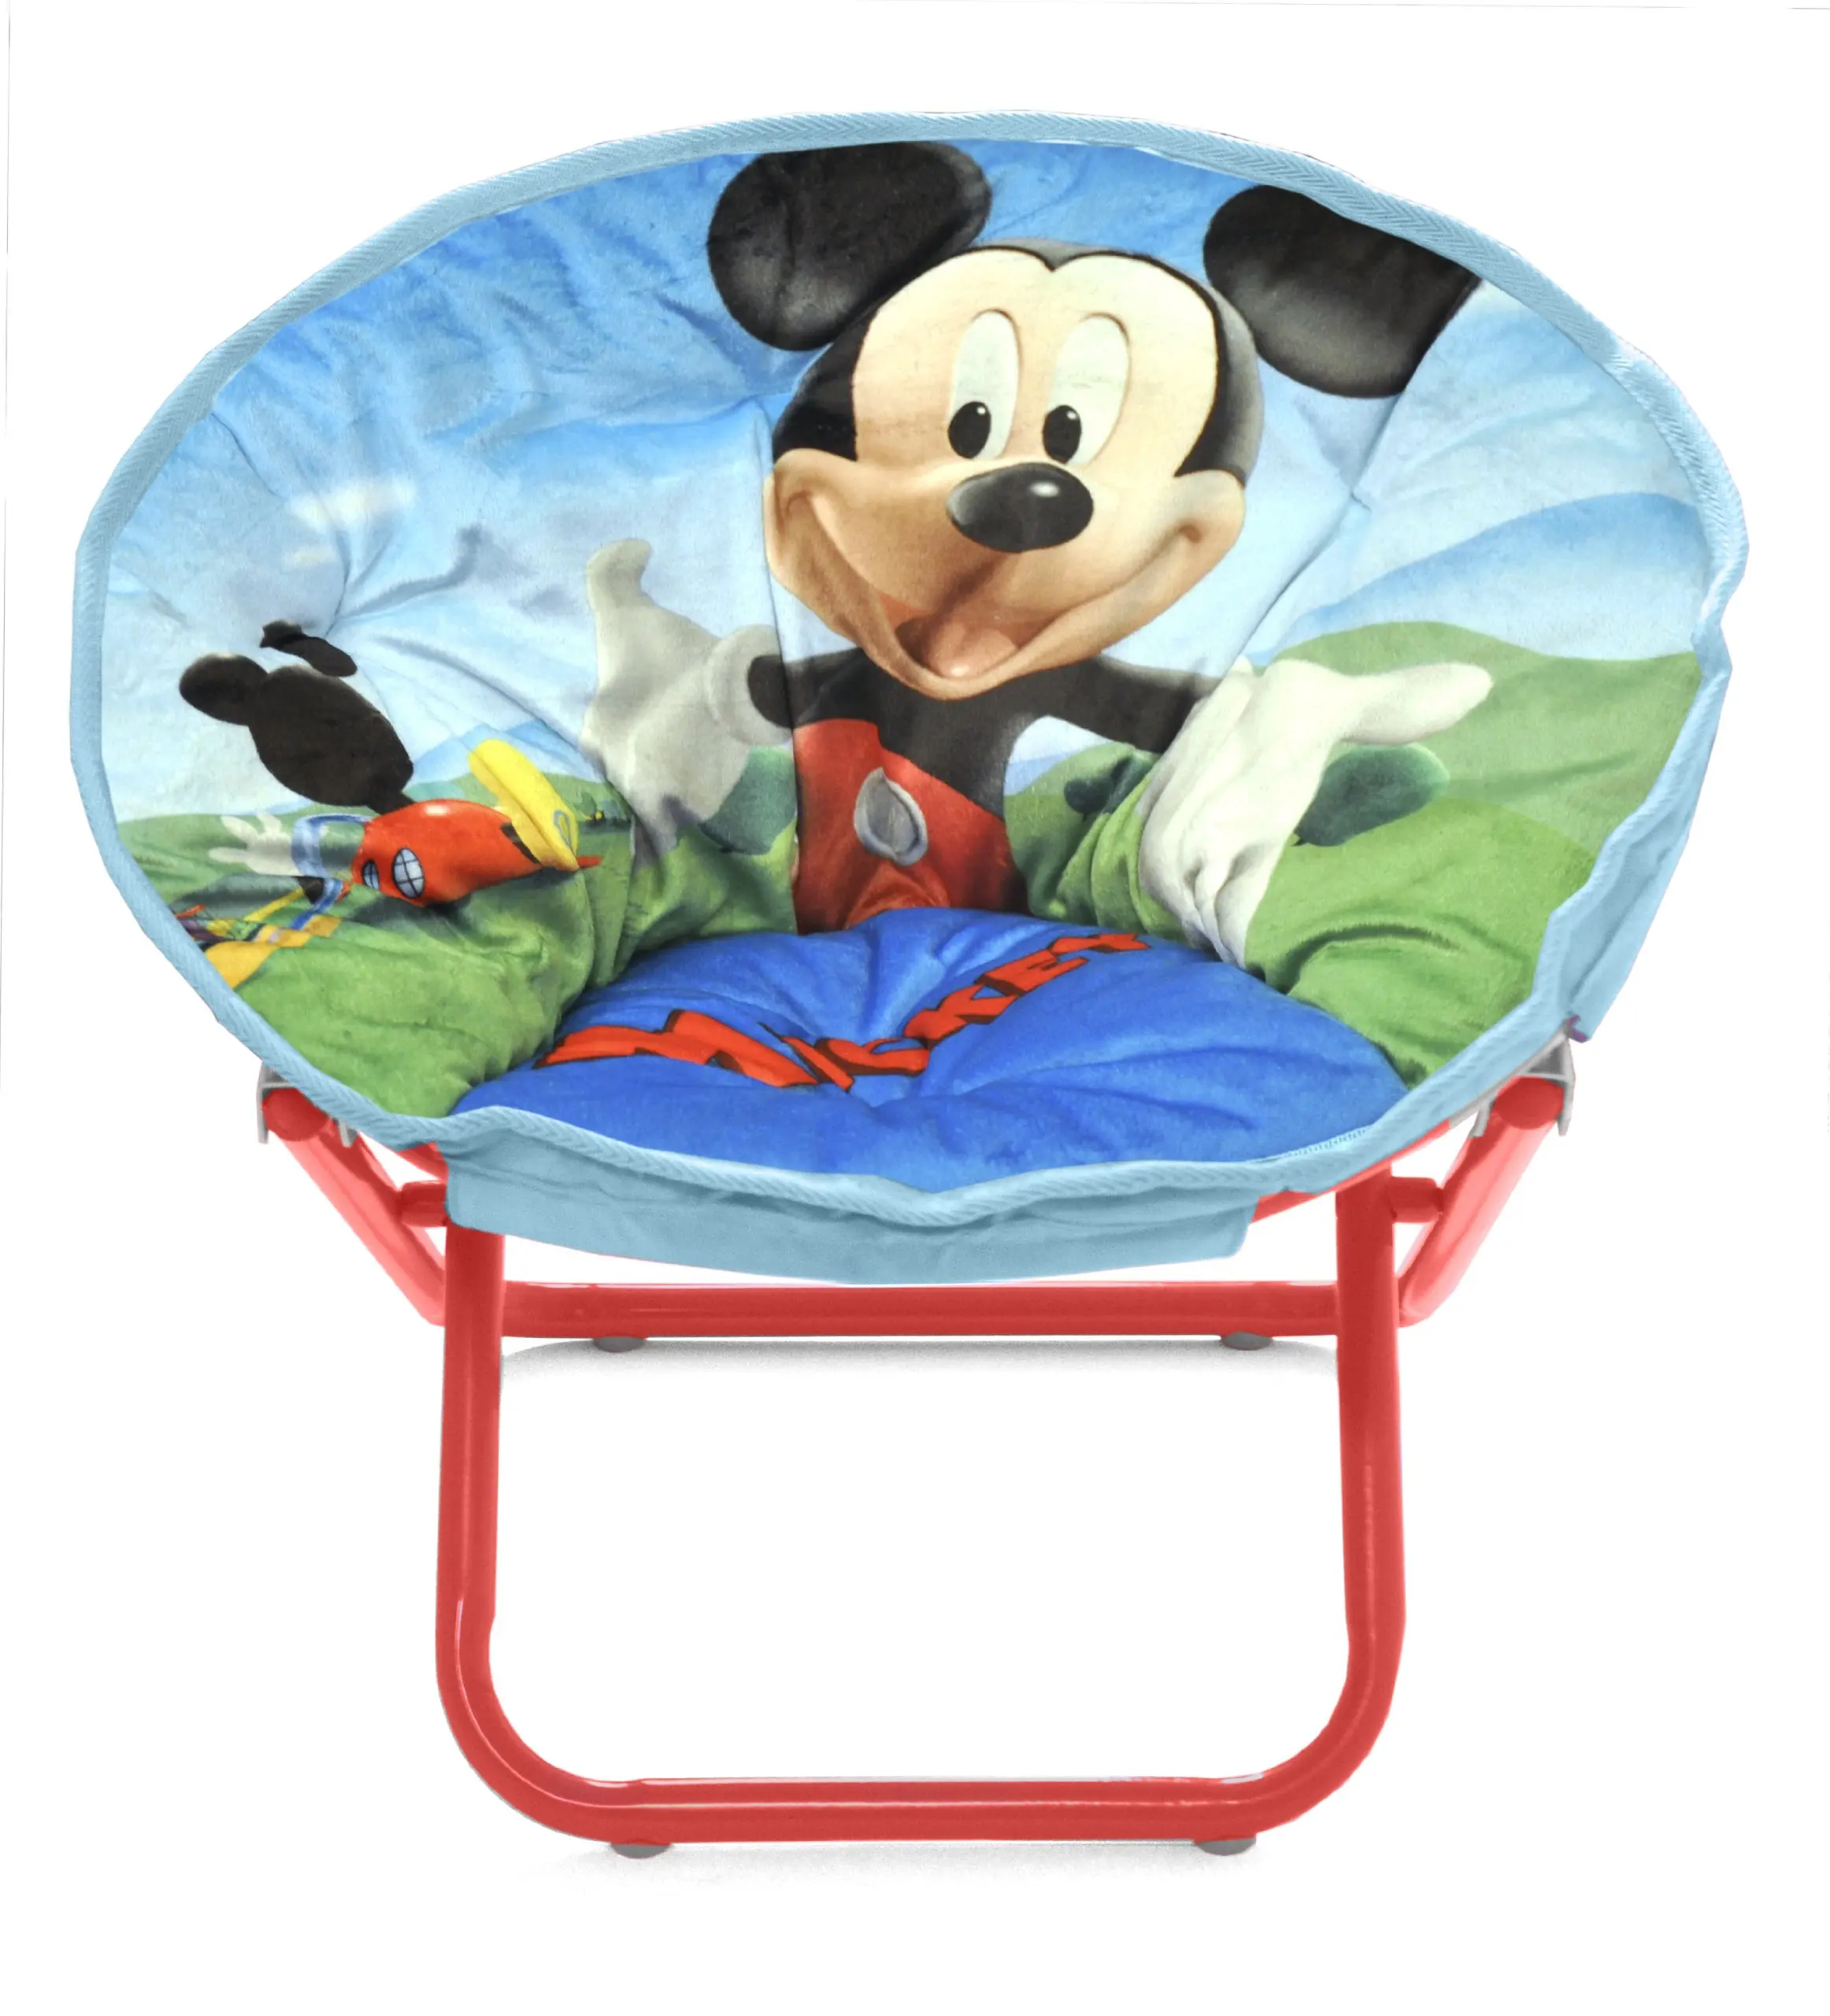 saucer chair baby